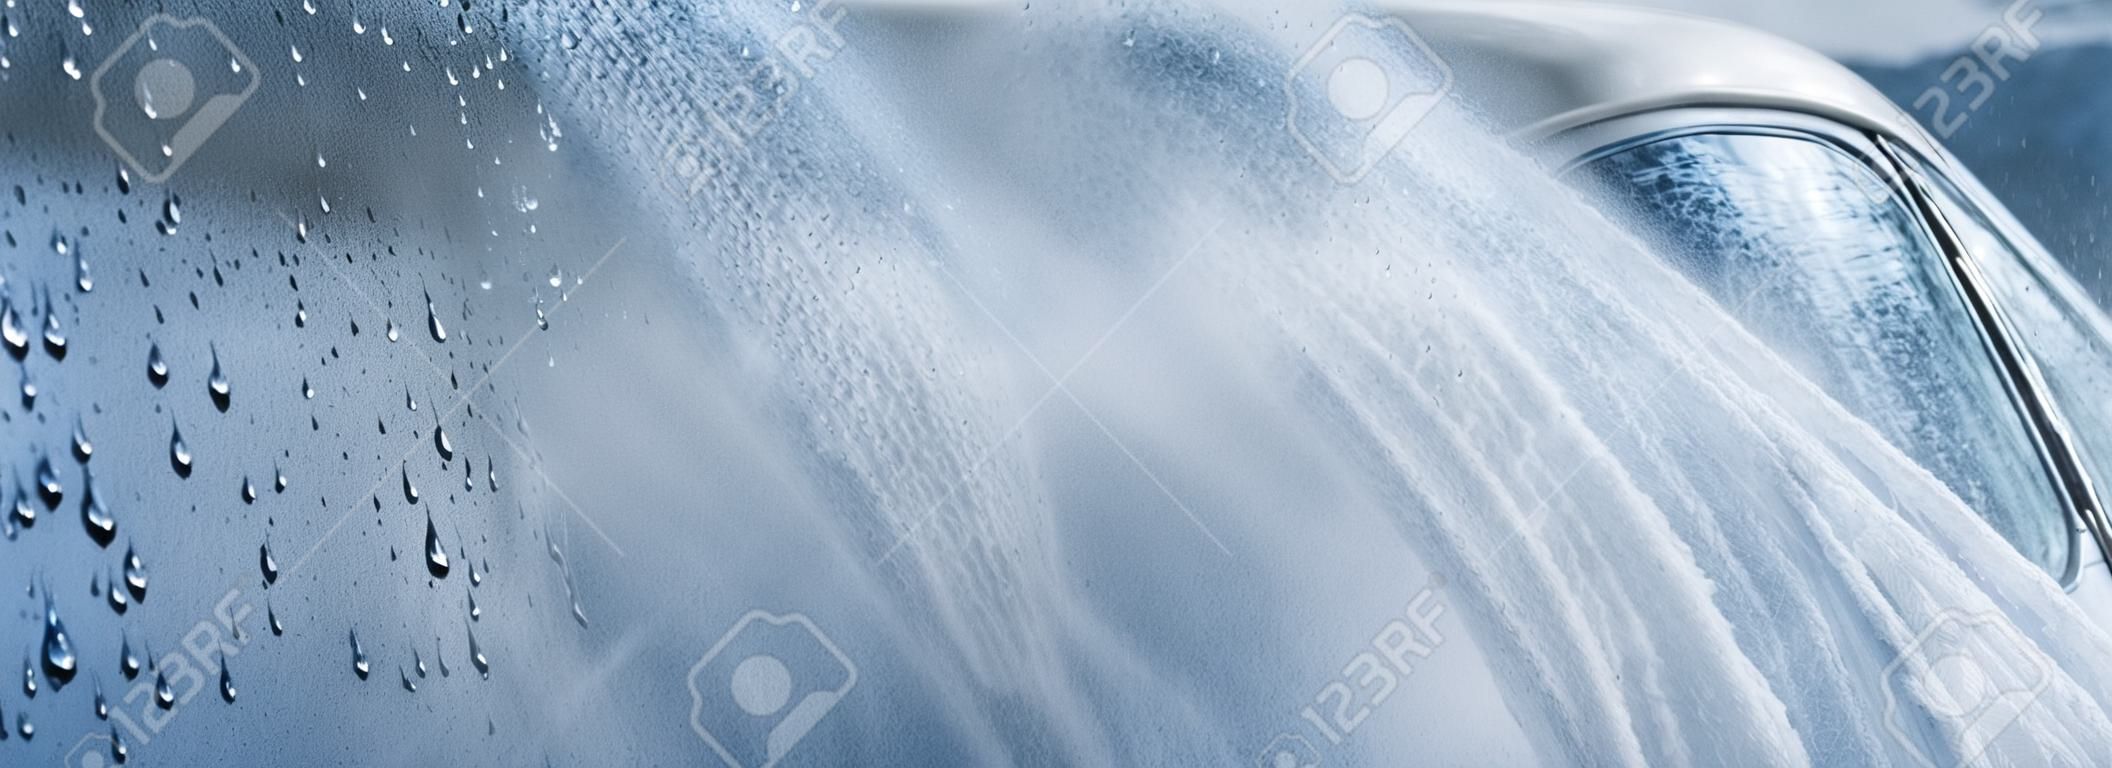 Abstract carwash banner, focus only on drops of water, jet spraying to car out of focus, toned in light blue color.